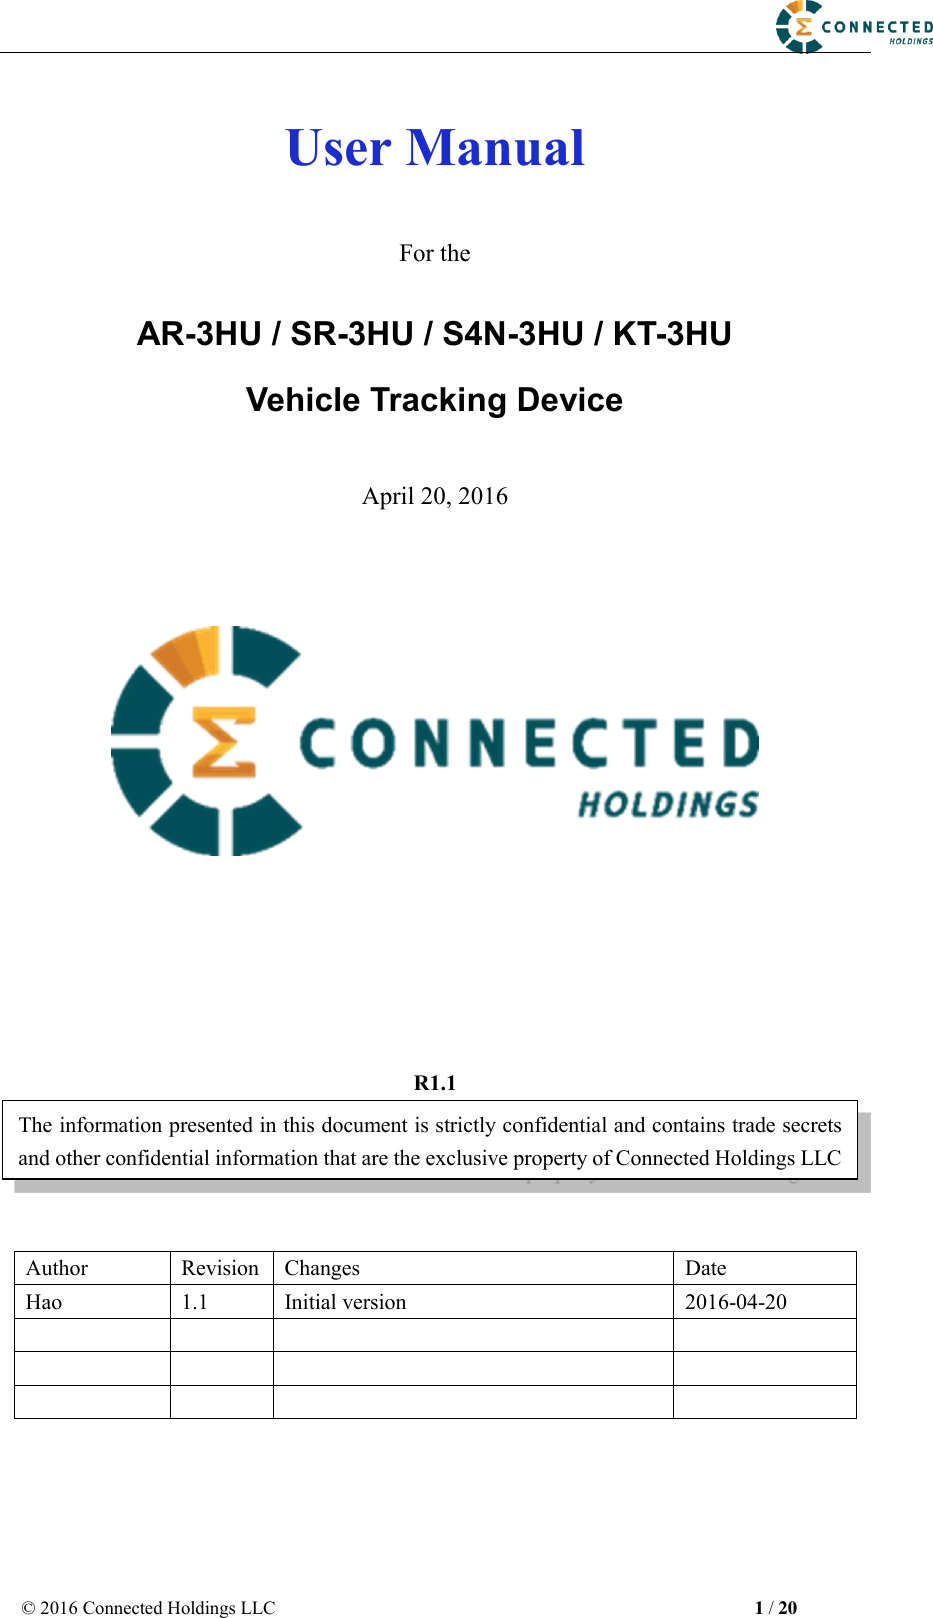                                                                                                            © 2016 Connected Holdings LLC                                                                                                      1 / 20  User Manual  For the AR-3HU / SR-3HU / S4N-3HU / KT-3HU Vehicle Tracking Device  April 20, 2016           R1.1    Author Revision Changes Date Hao 1.1 Initial version 2016-04-20             The information presented in this document is strictly confidential and contains trade secrets and other confidential information that are the exclusive property of Connected Holdings LLC 